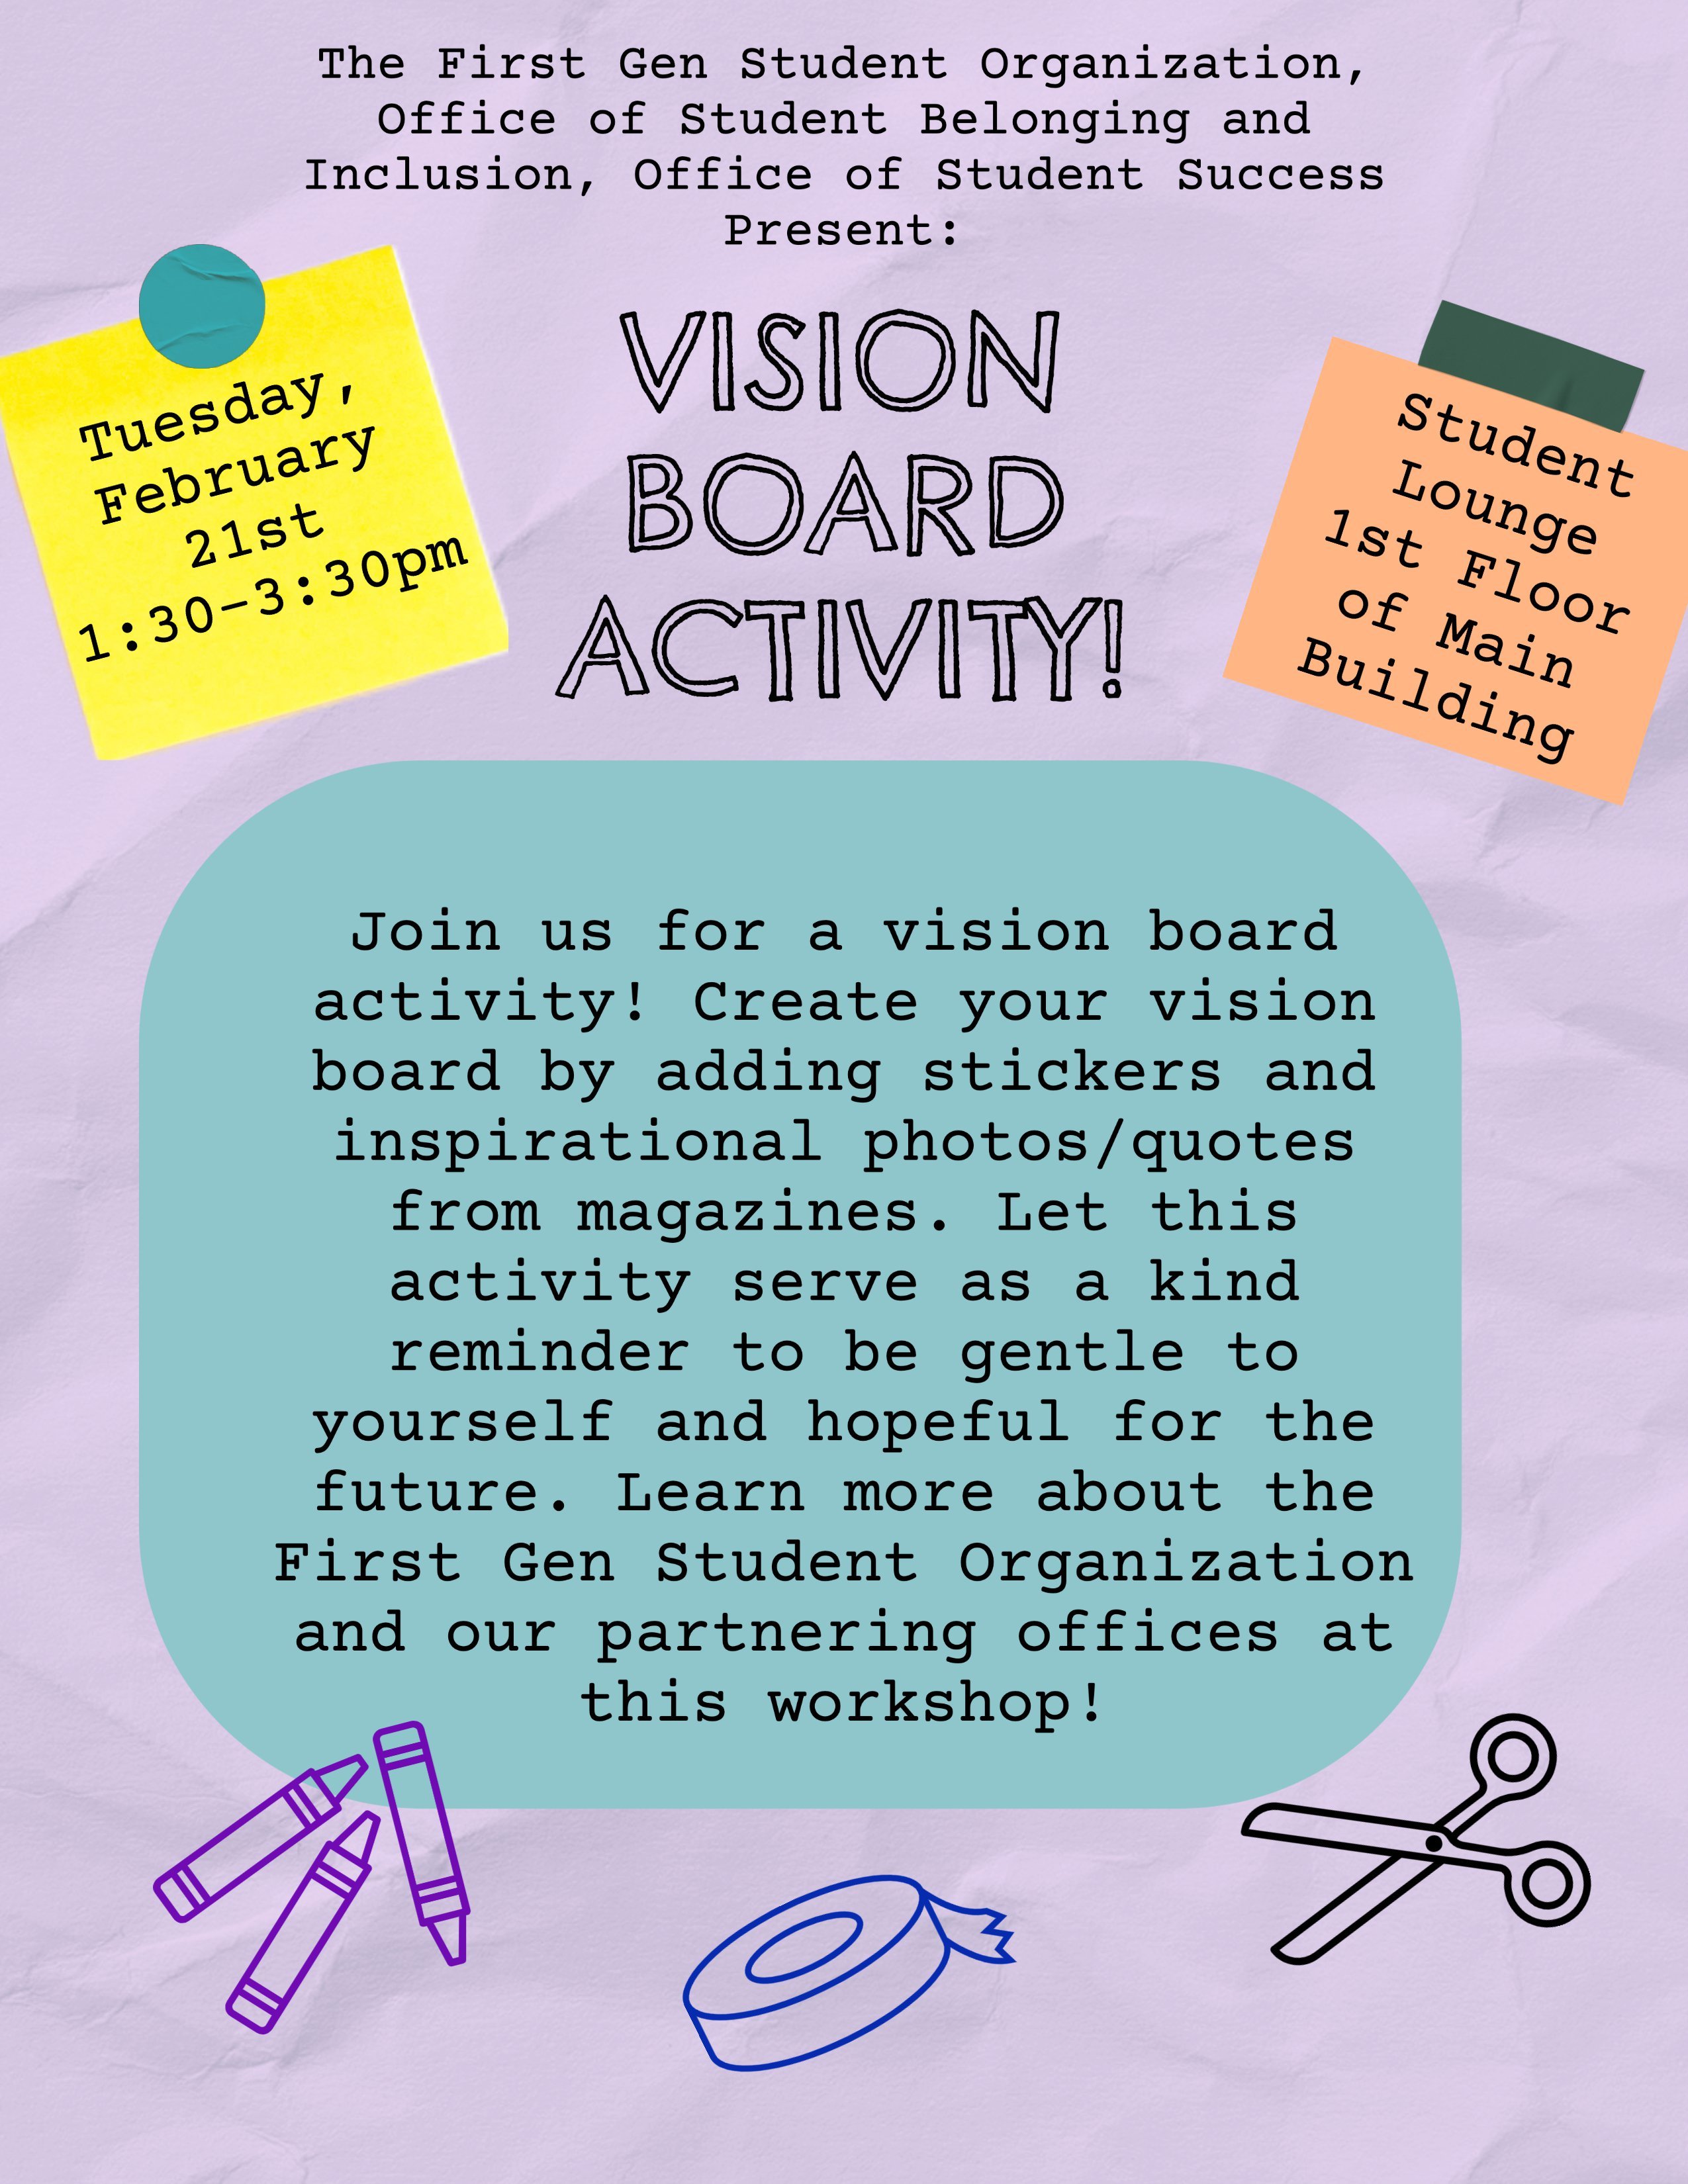 Vision Board Activity- Flyer Print Out -1.jpg